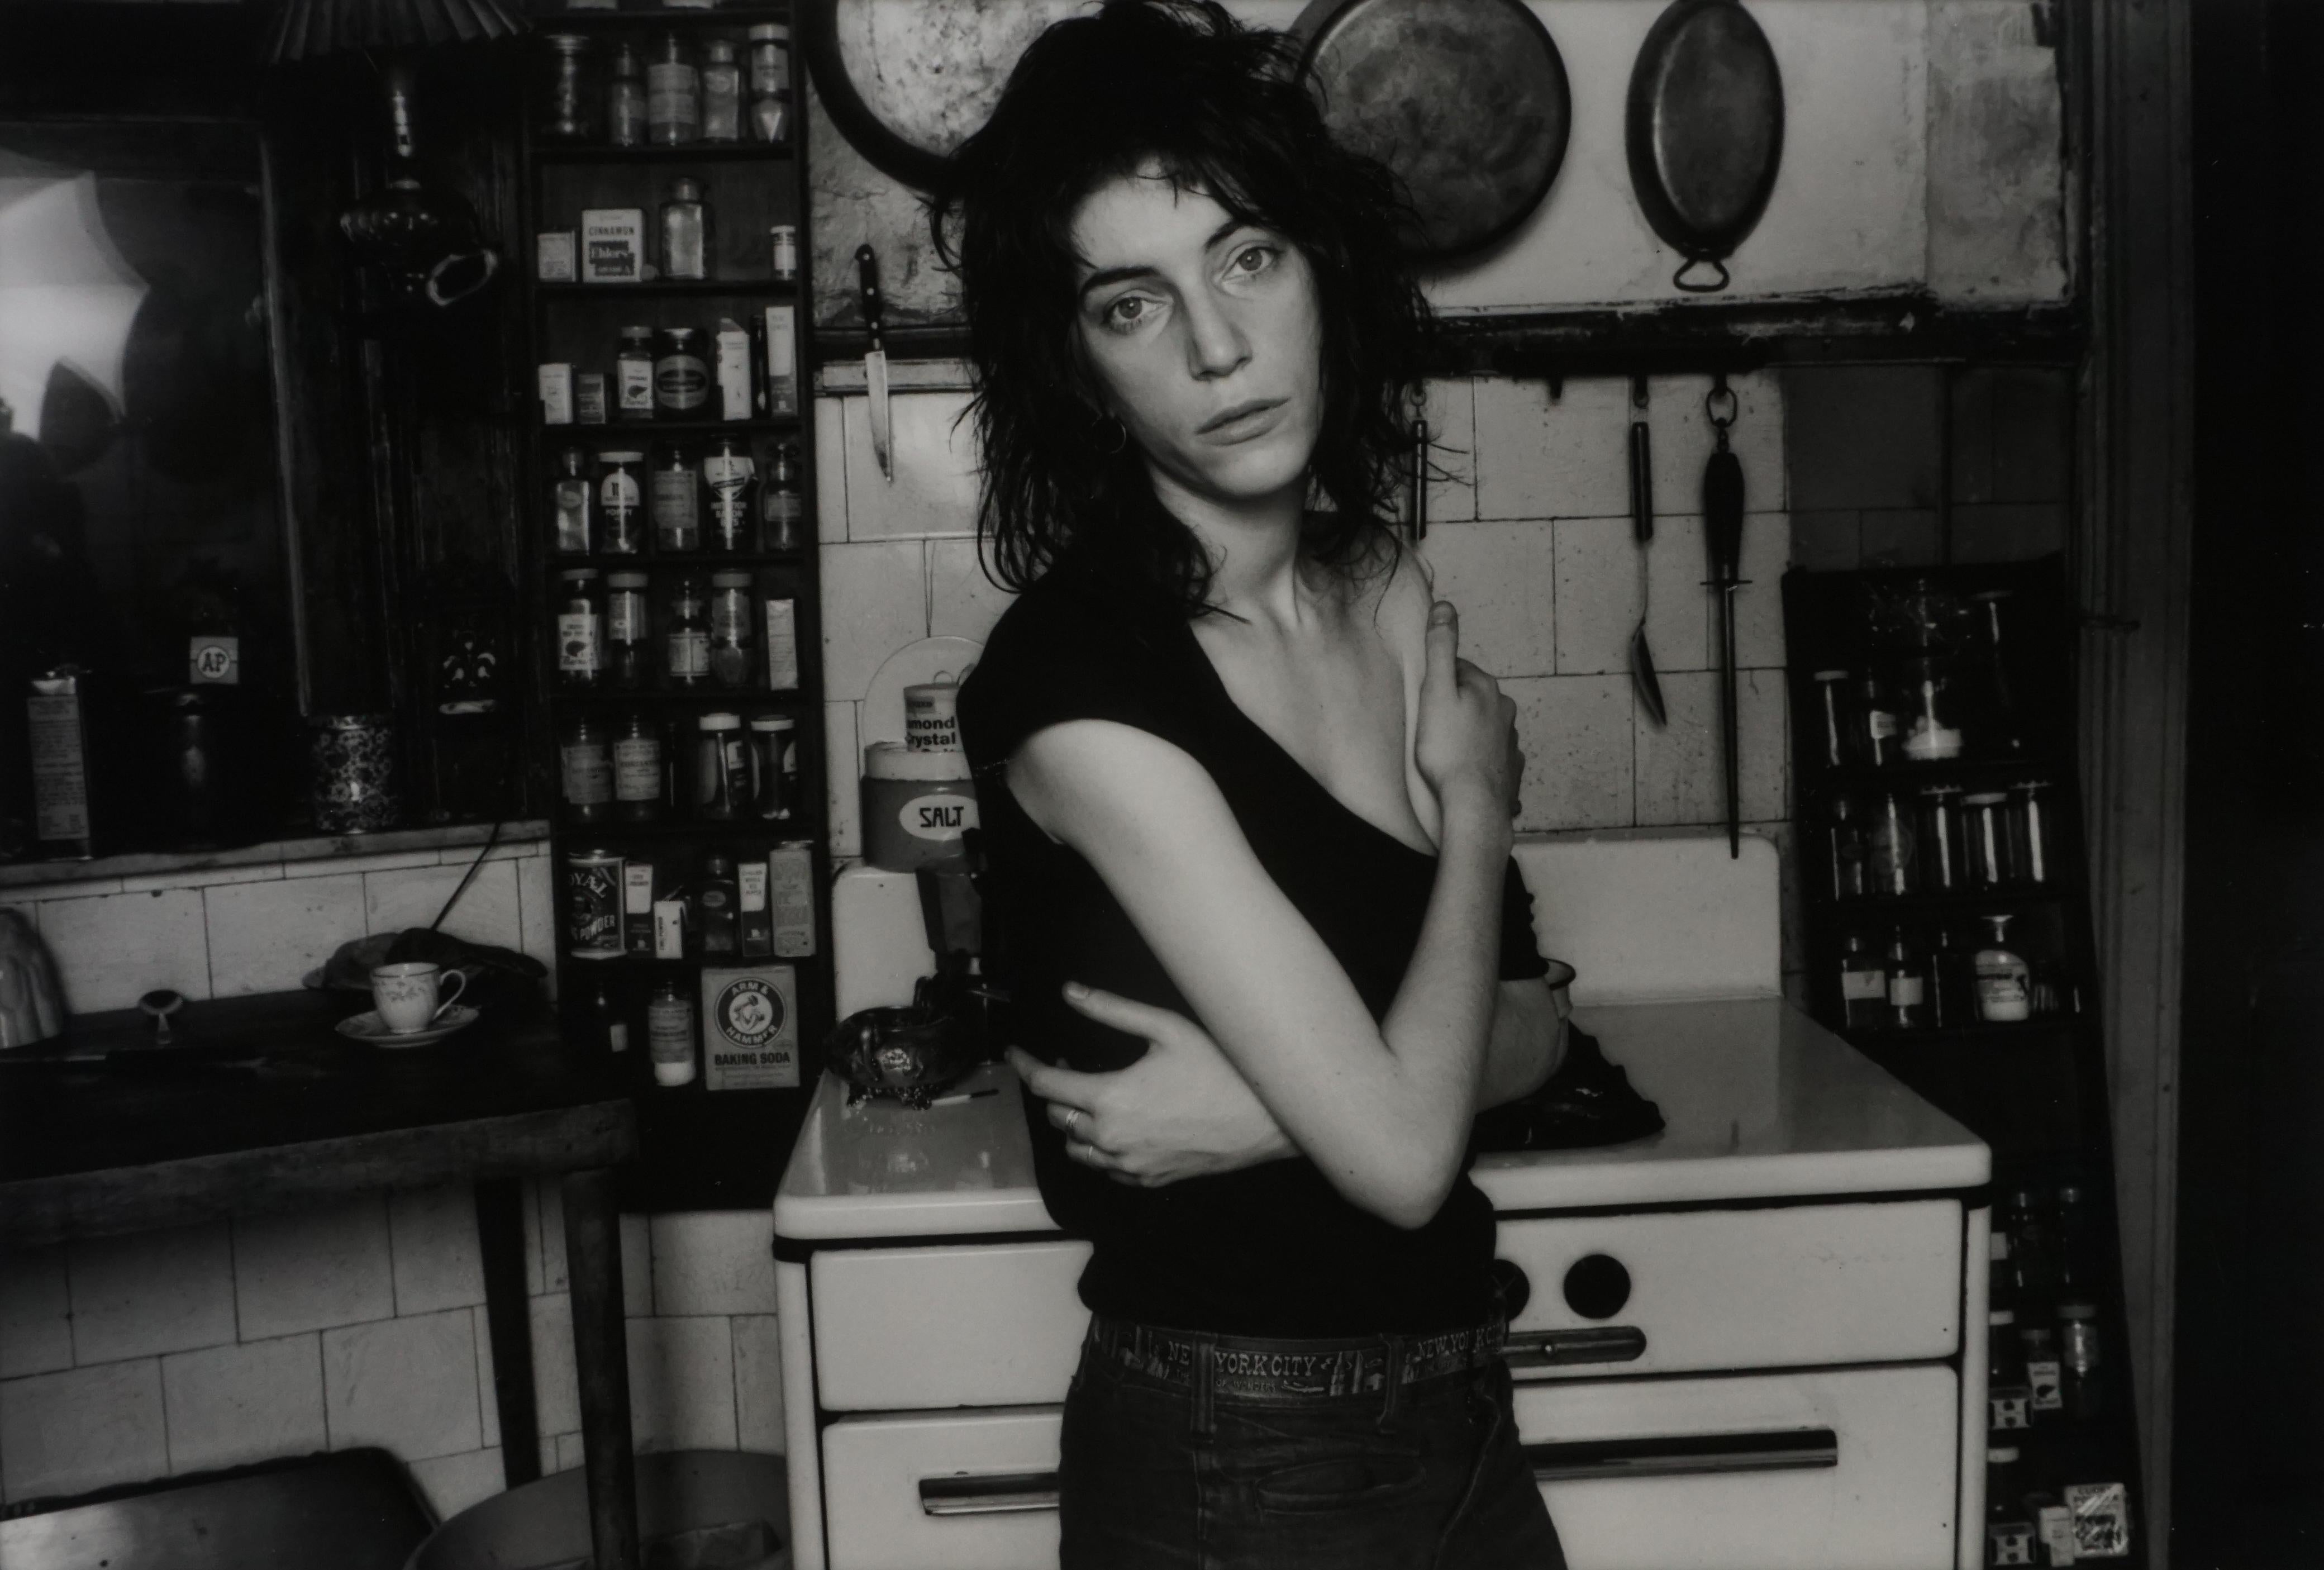 Norman Seeff Black and White Photograph - Patti Smith, New York, 1969/Printed 1997